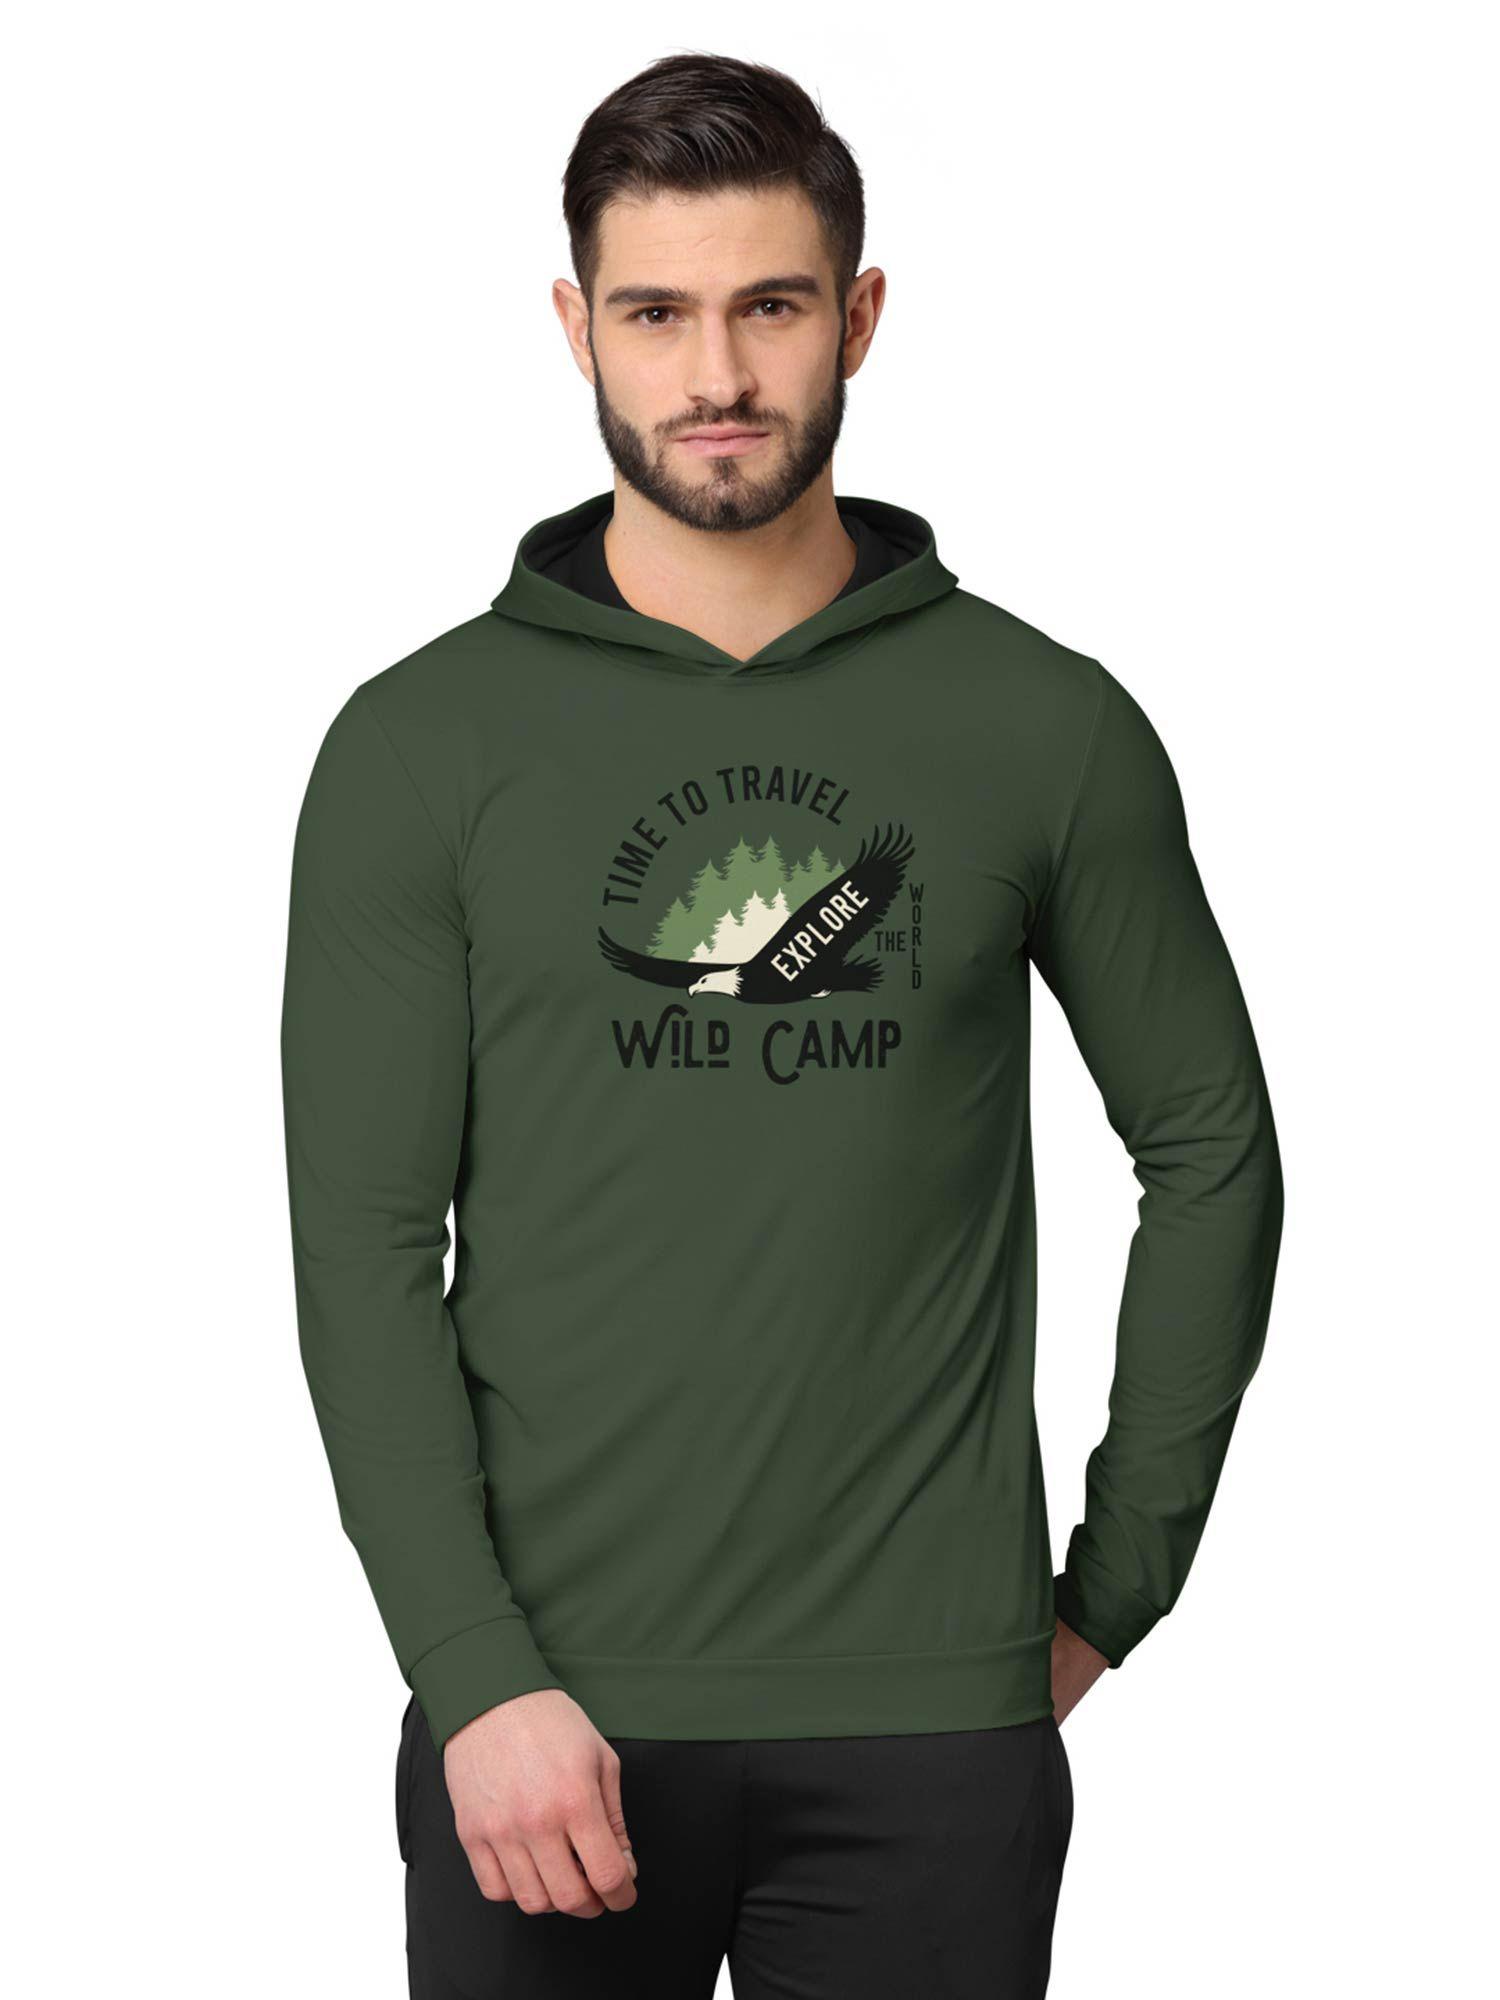 trendy-front-&-back-printed-full-sleeve-hooded-sweatshirts-for-men-green